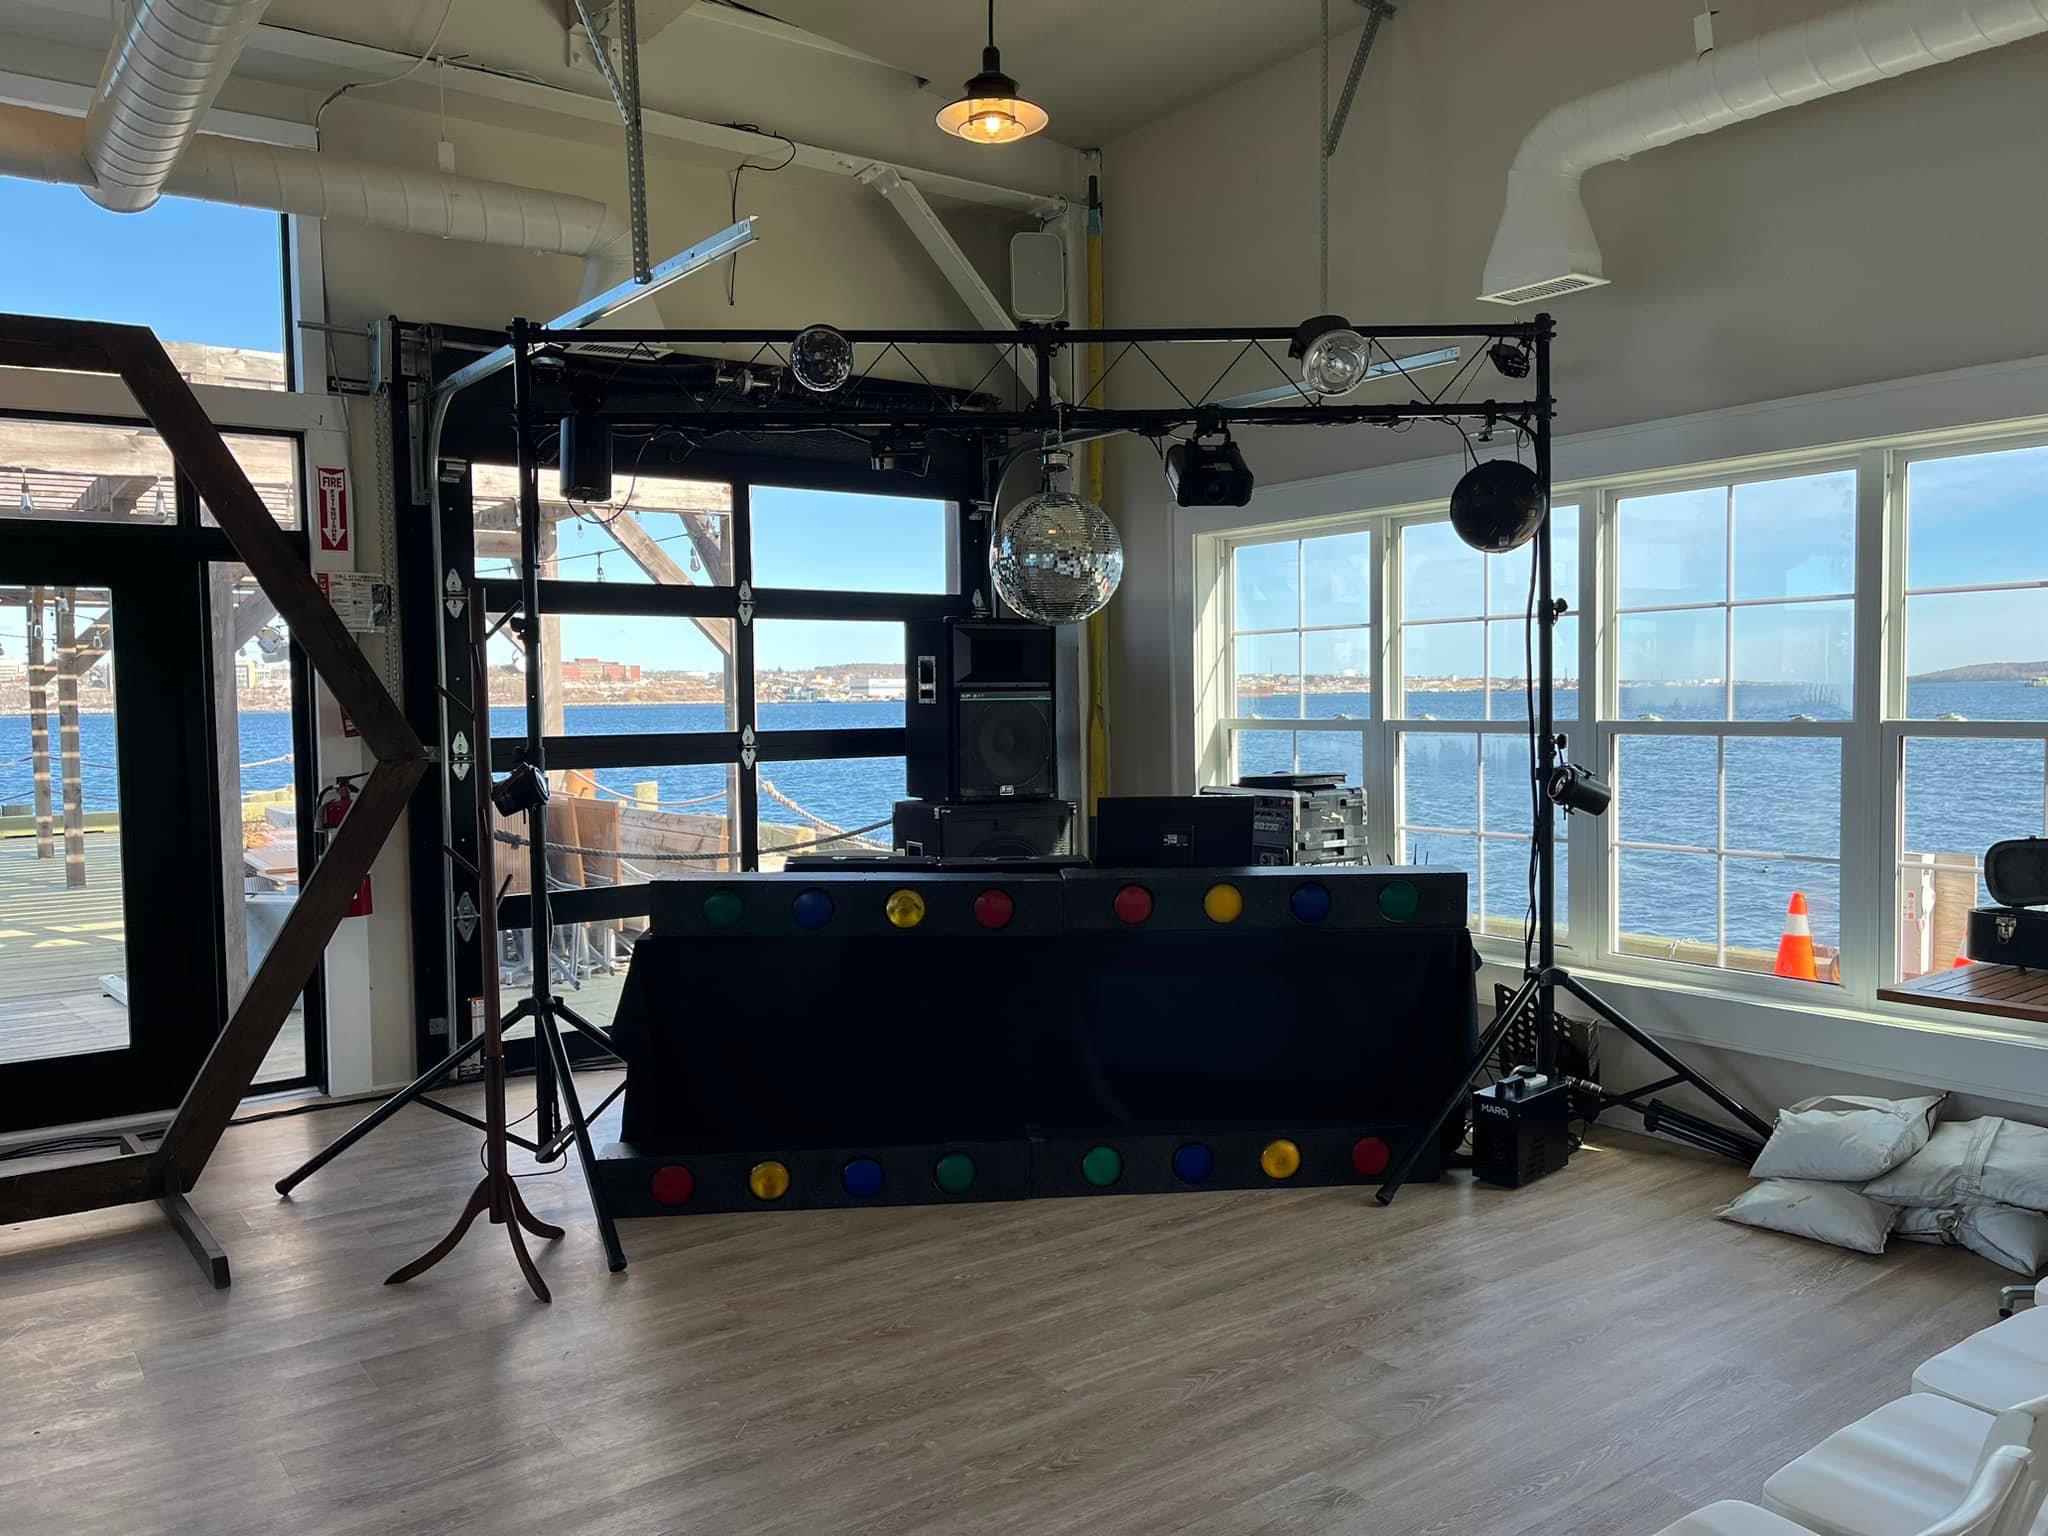 Equipment setup at the Cable Wharf Halifax